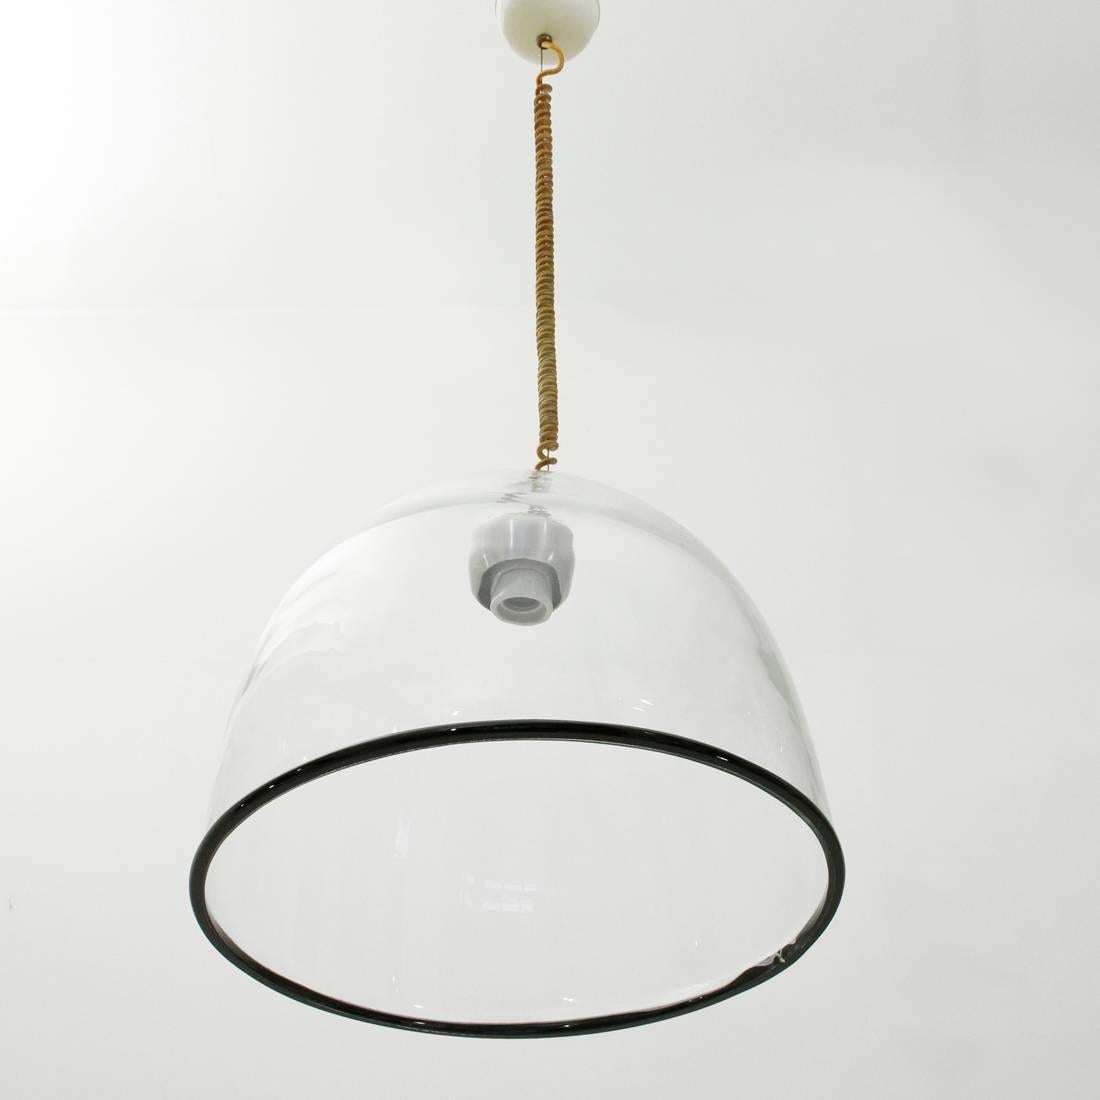 Chandelier produced at the end of the 1960s by Leucos on a project by Renato Toso.
Diffuser in transparent Murano glass, thick, with black border.
Possibility to adjust the height of the wire and the inclination of the diffuser.
Good general